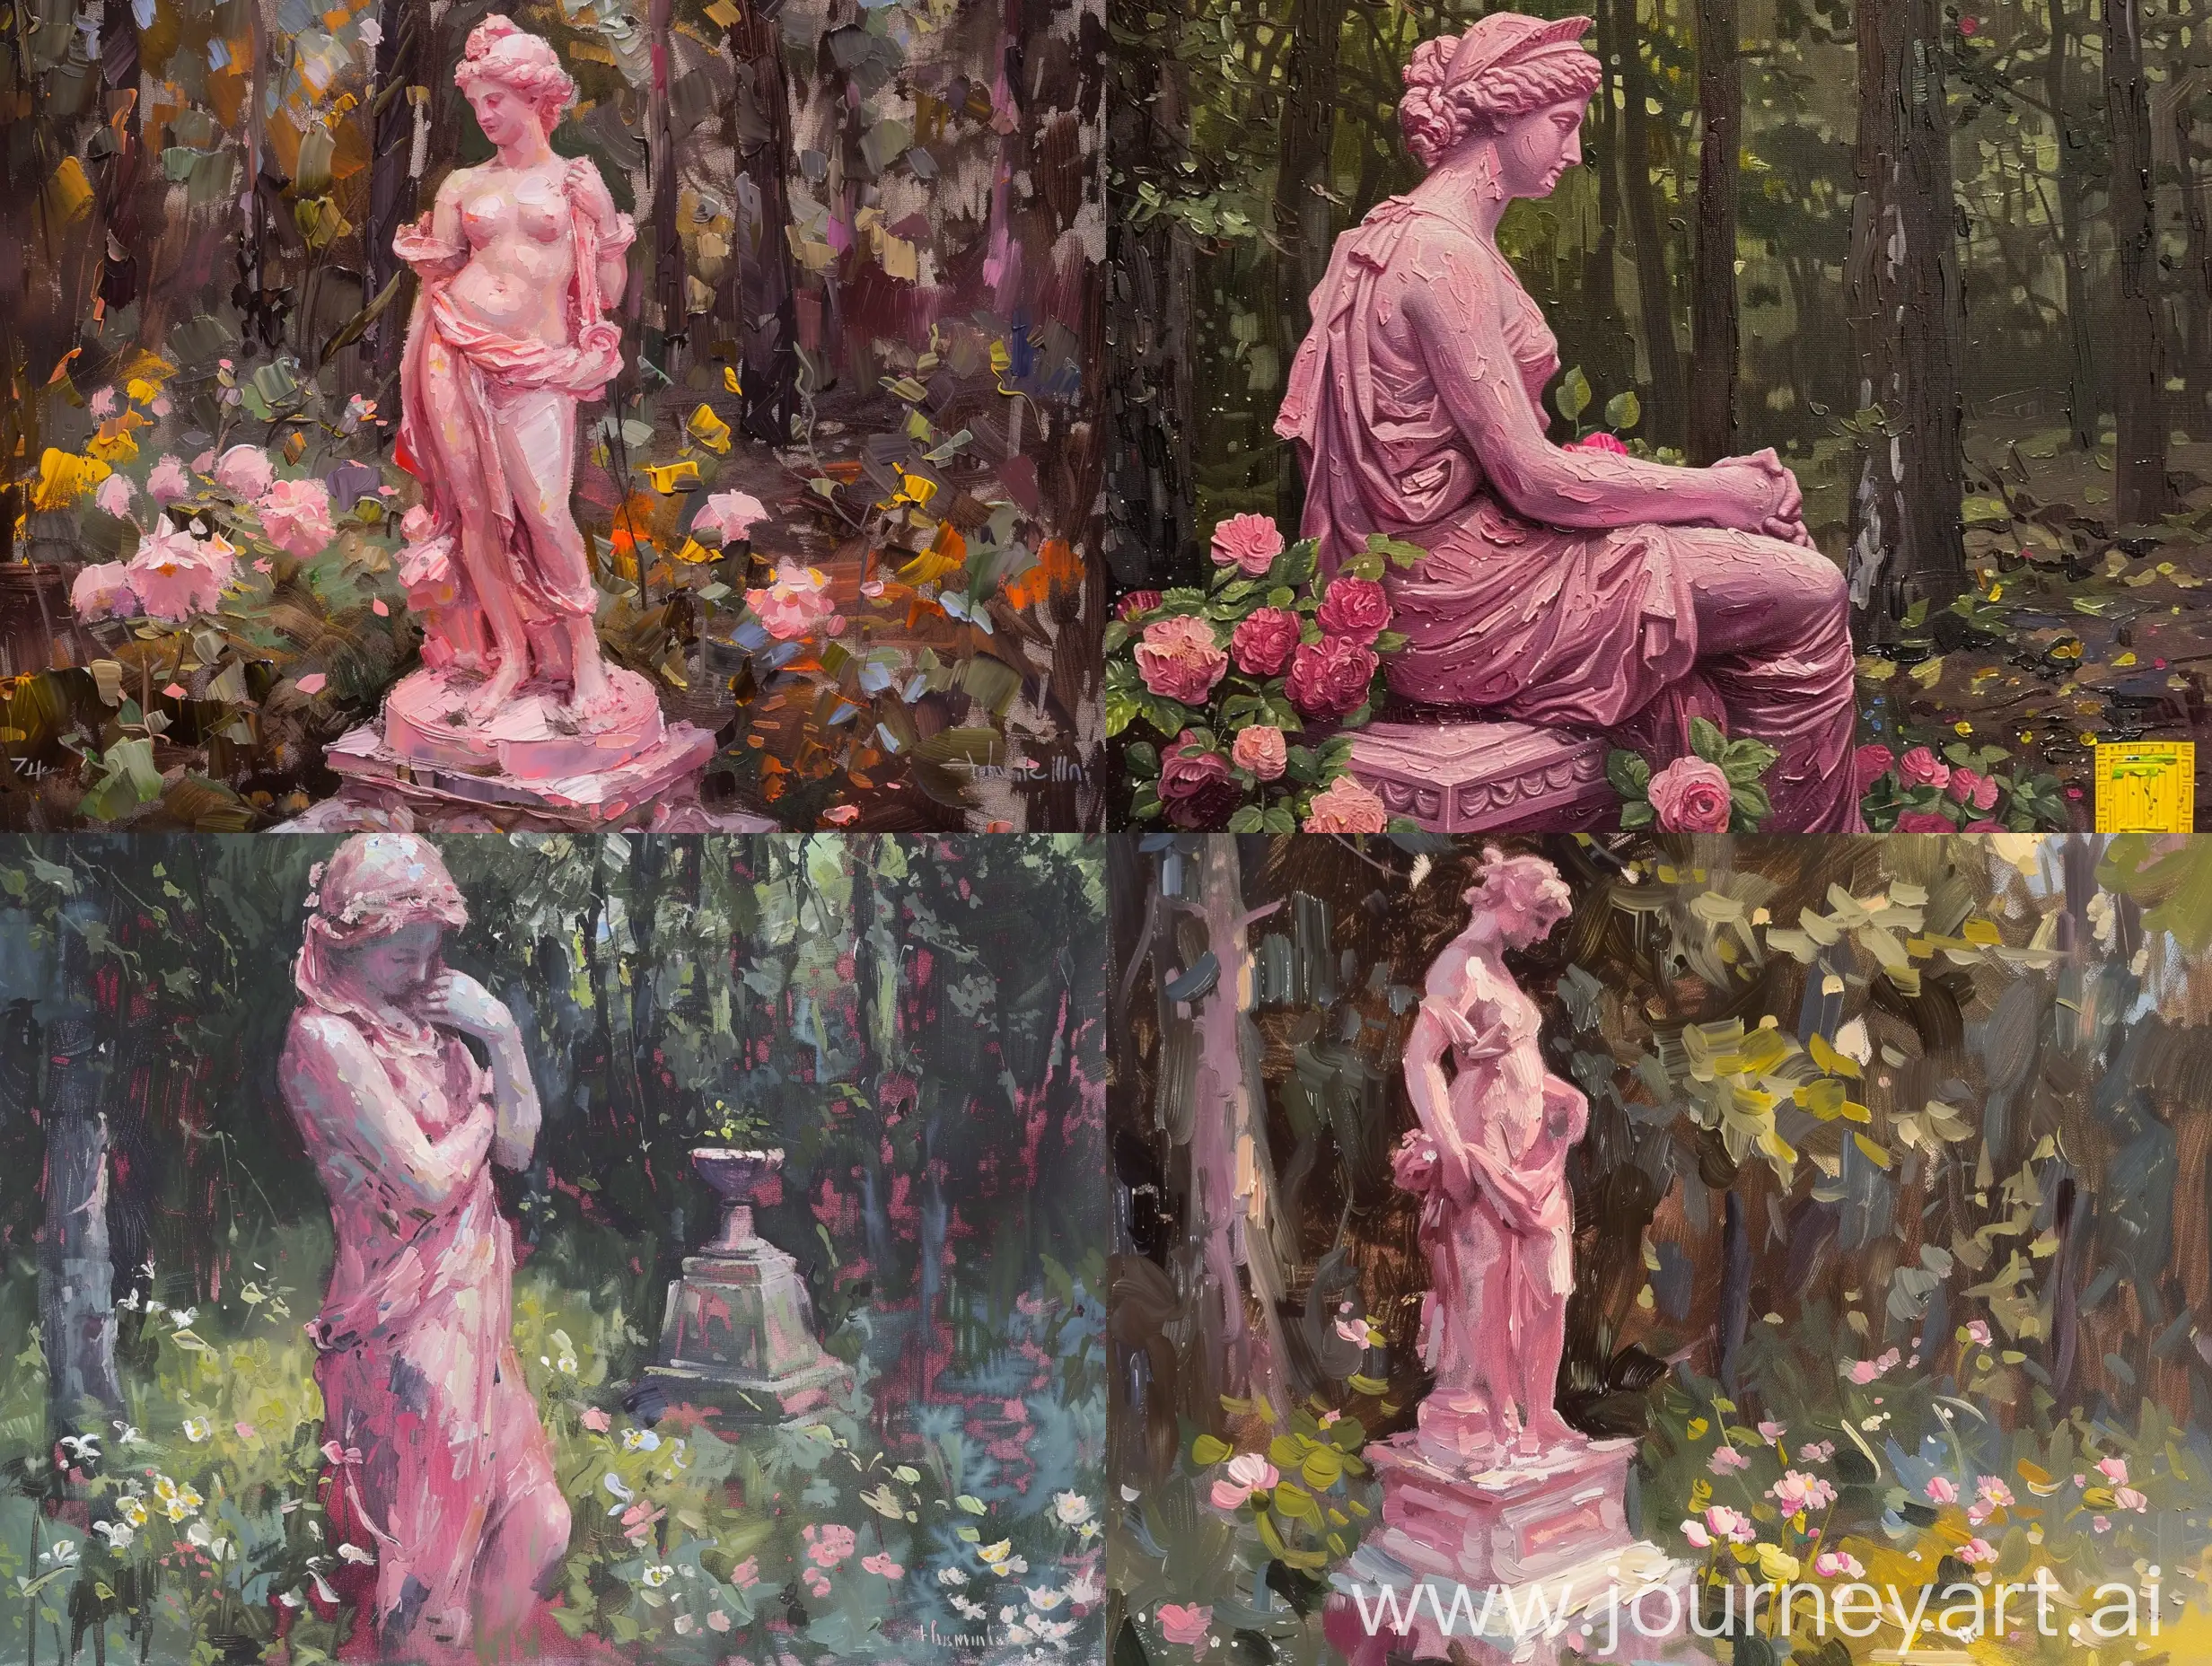 Tender-Pink-Themis-Statue-Surrounded-by-Floral-Beauty-in-an-Oil-Painting